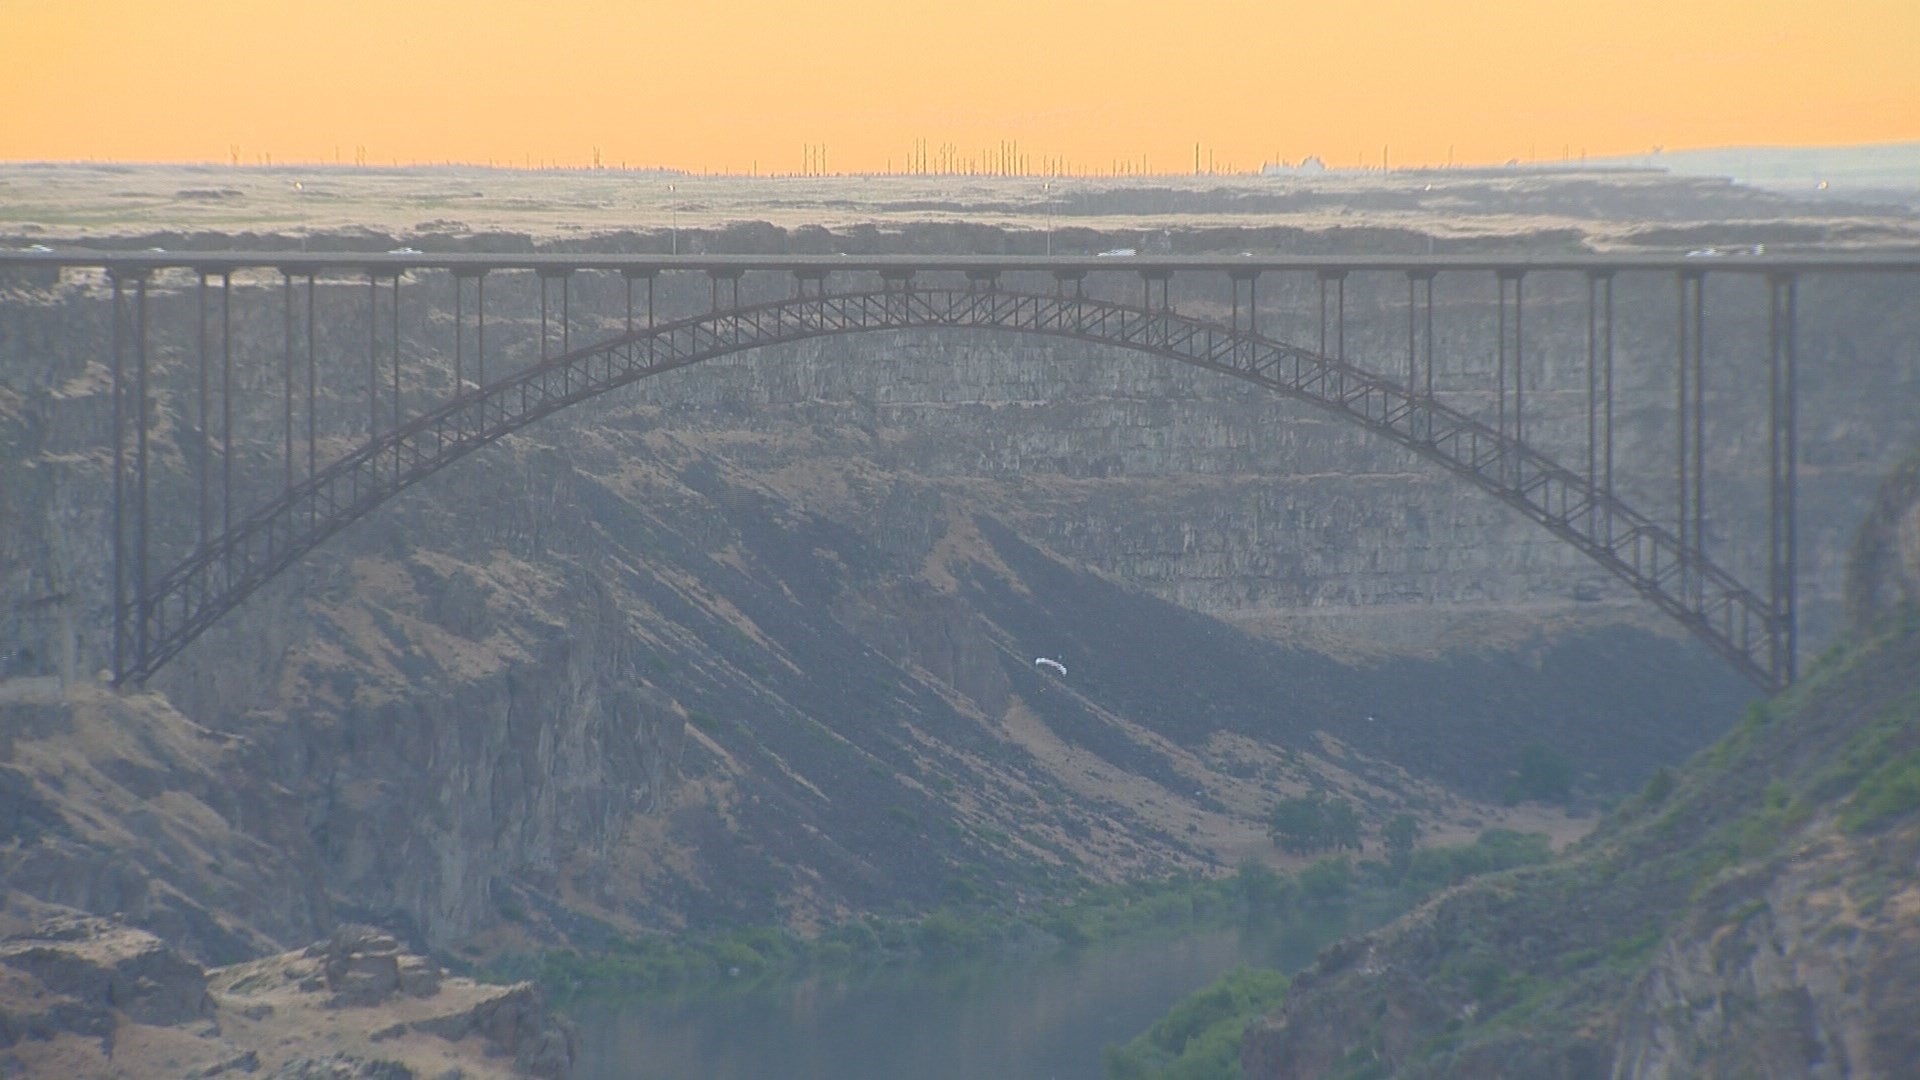 An unidentified body of a woman was found floating under the Perrine Bridge in Twin Falls on Sept. 9, 2014. Now, she has a name.